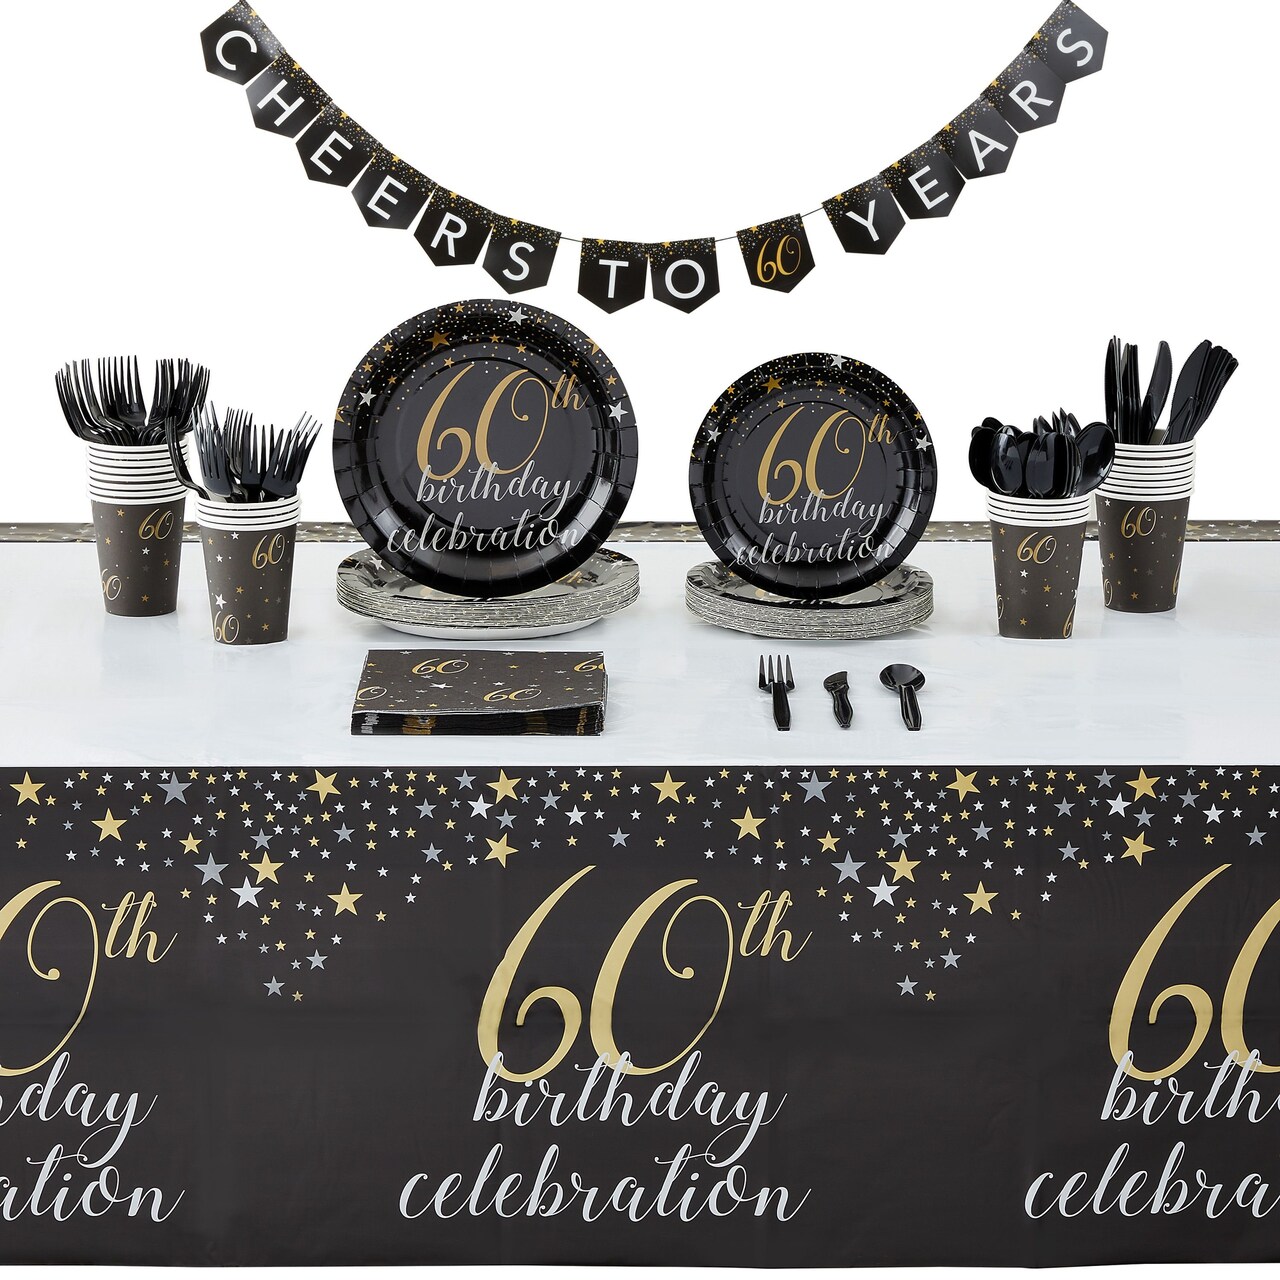 60th Birthday Party Supplies and Decorations with Banner, Tablecloth,  Serves 24 Black and Gold Paper Plates, Napkins, Cups, Cutlery (170 Pieces)